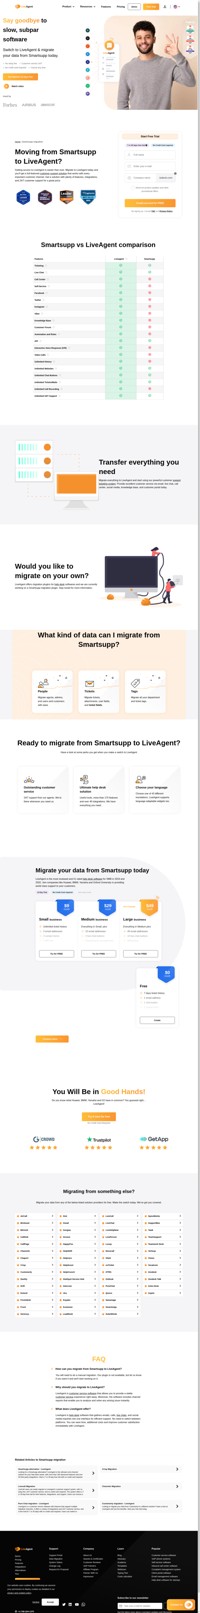 Moving from Smartsupp to Liveagent? Let us migrate your data for you! Contact our support specialists and discuss data migration with them.